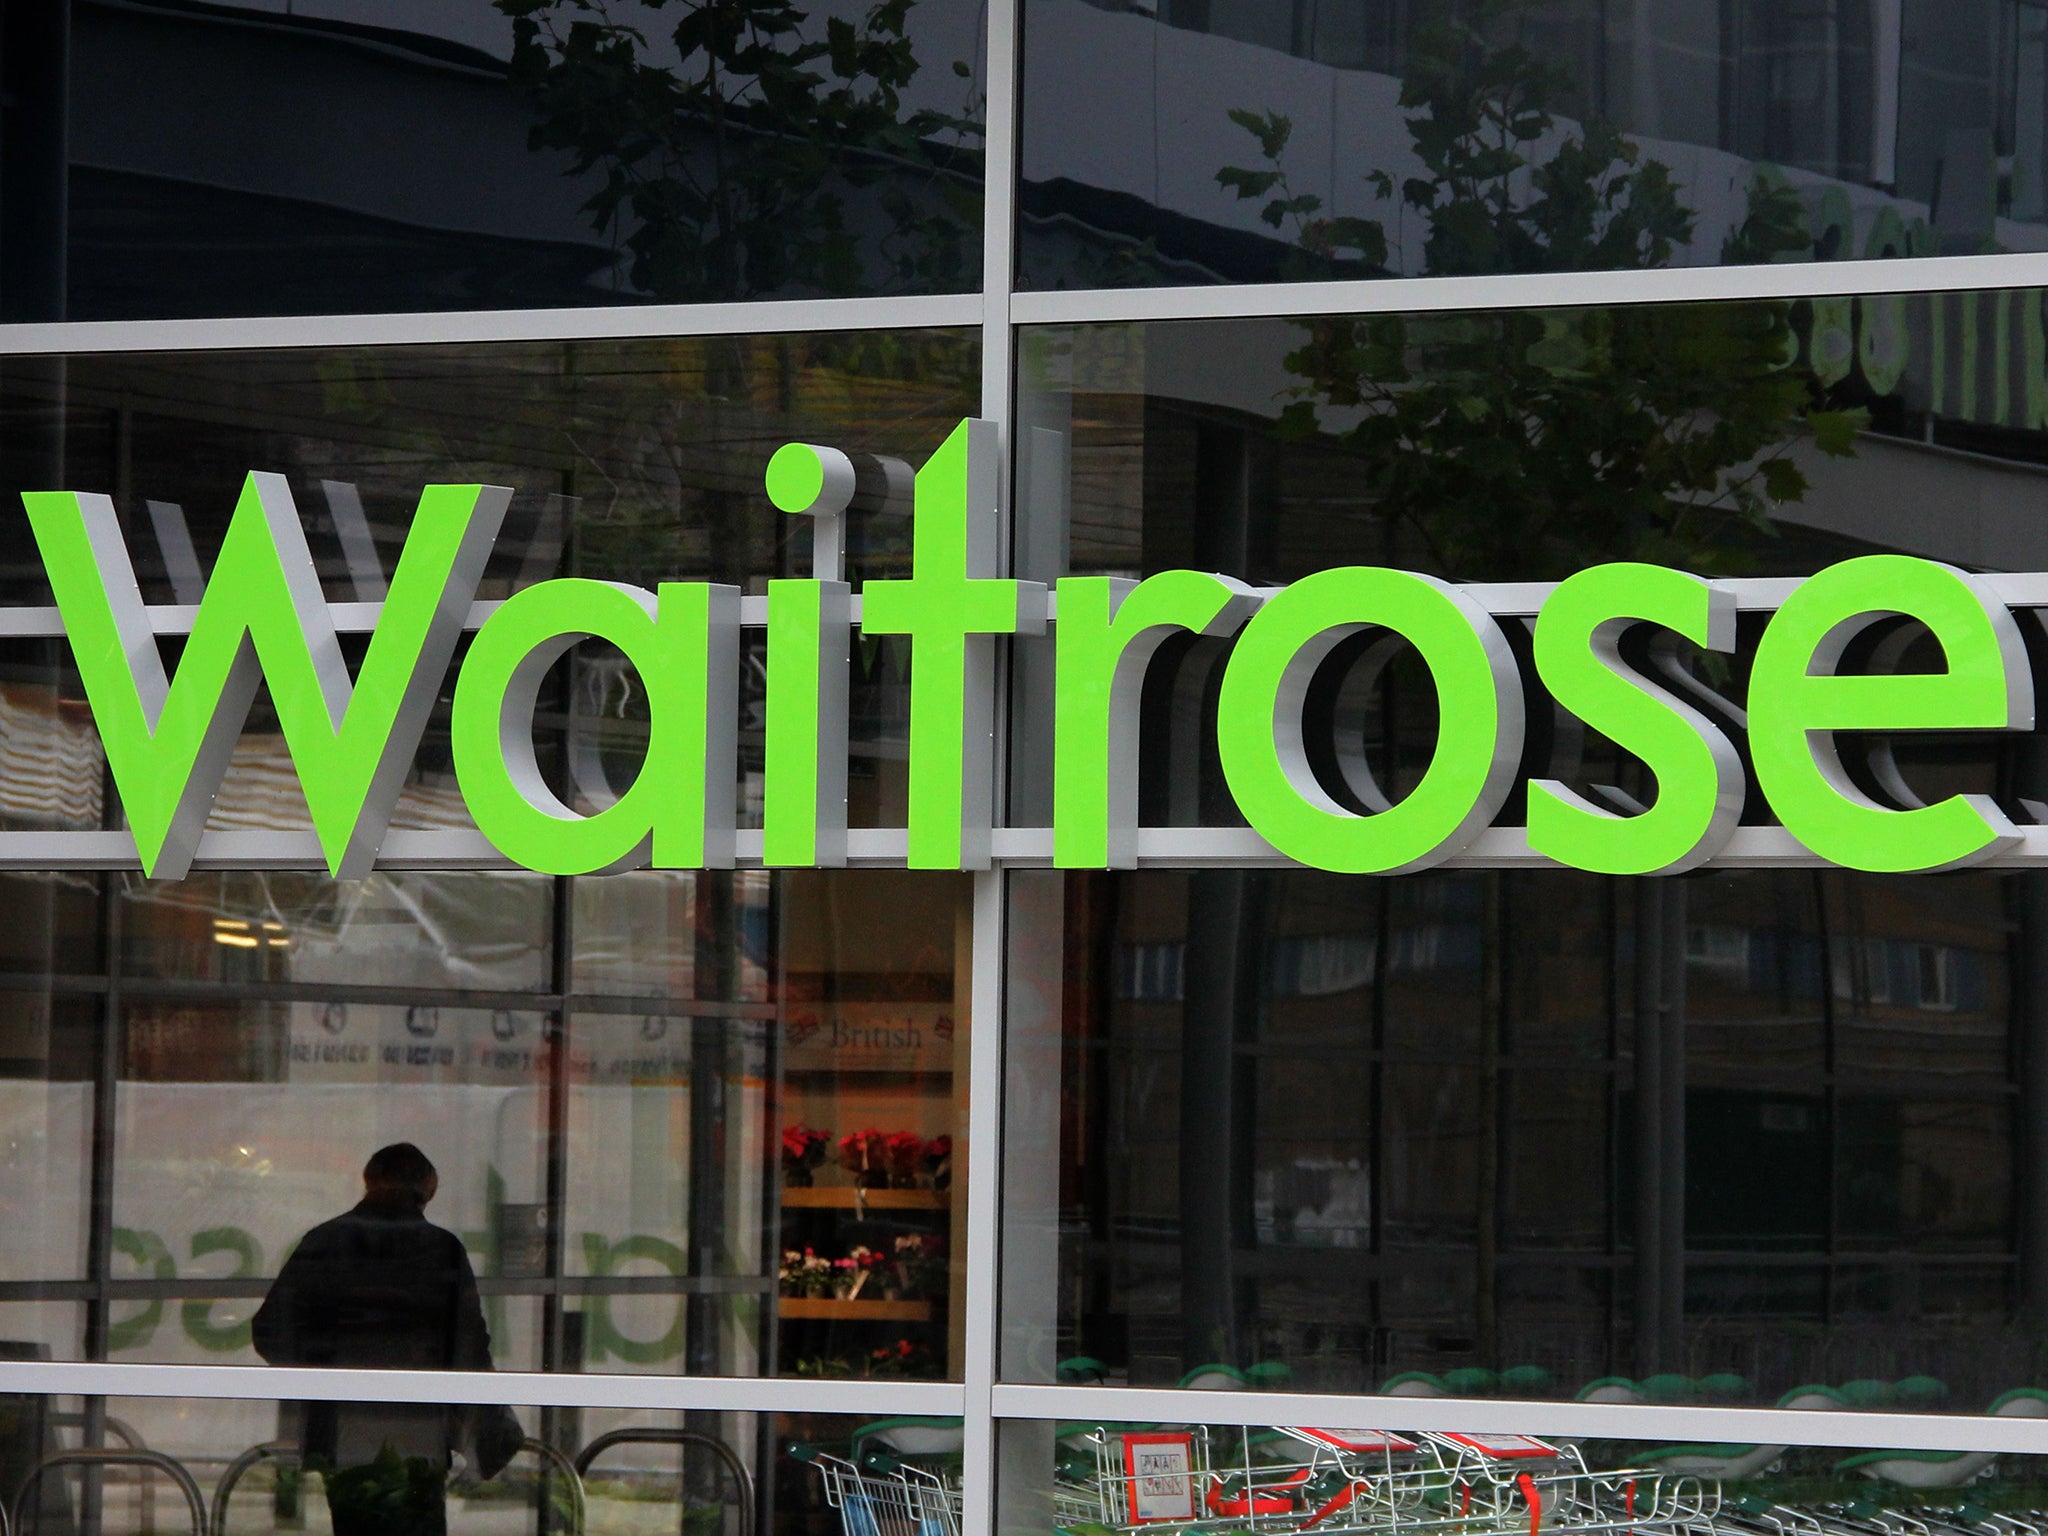 Waitrose sales were up 2.8 per cent in the Christmas period